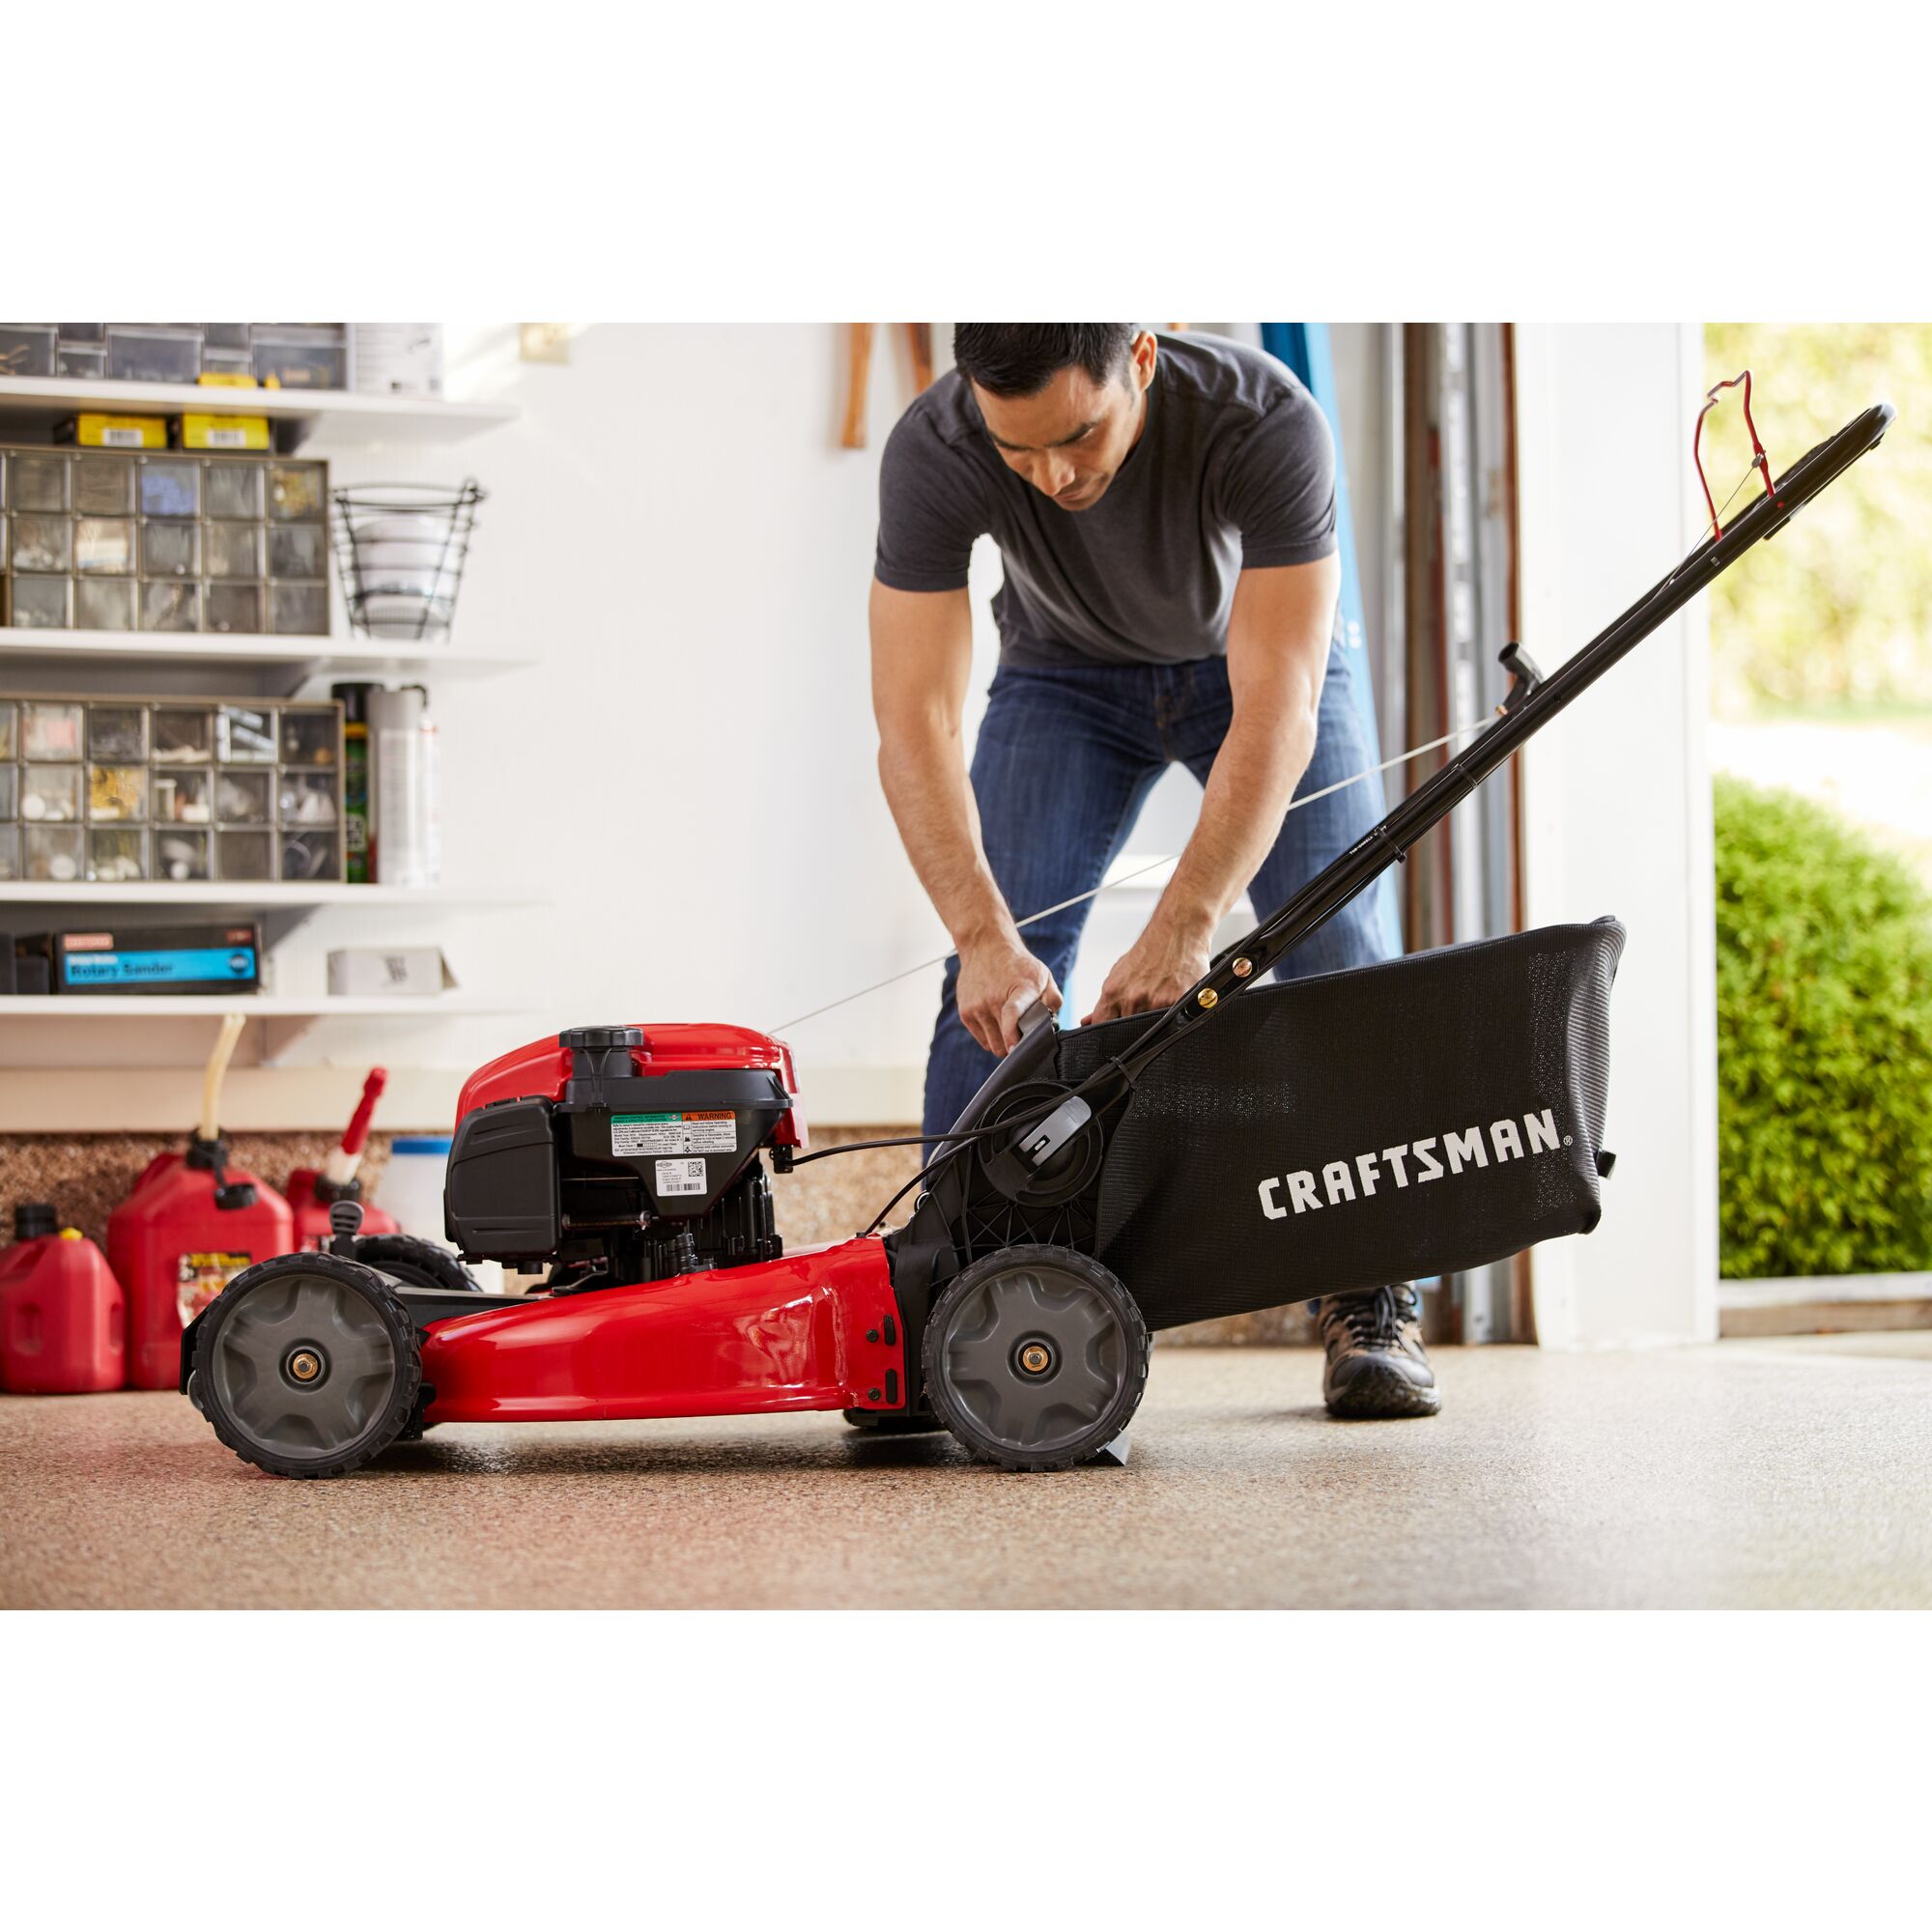 CRAFTSMAN M260 21-IN.163cc Fwd Self-Propelled Mower zoomed in being prepared for vertical storage